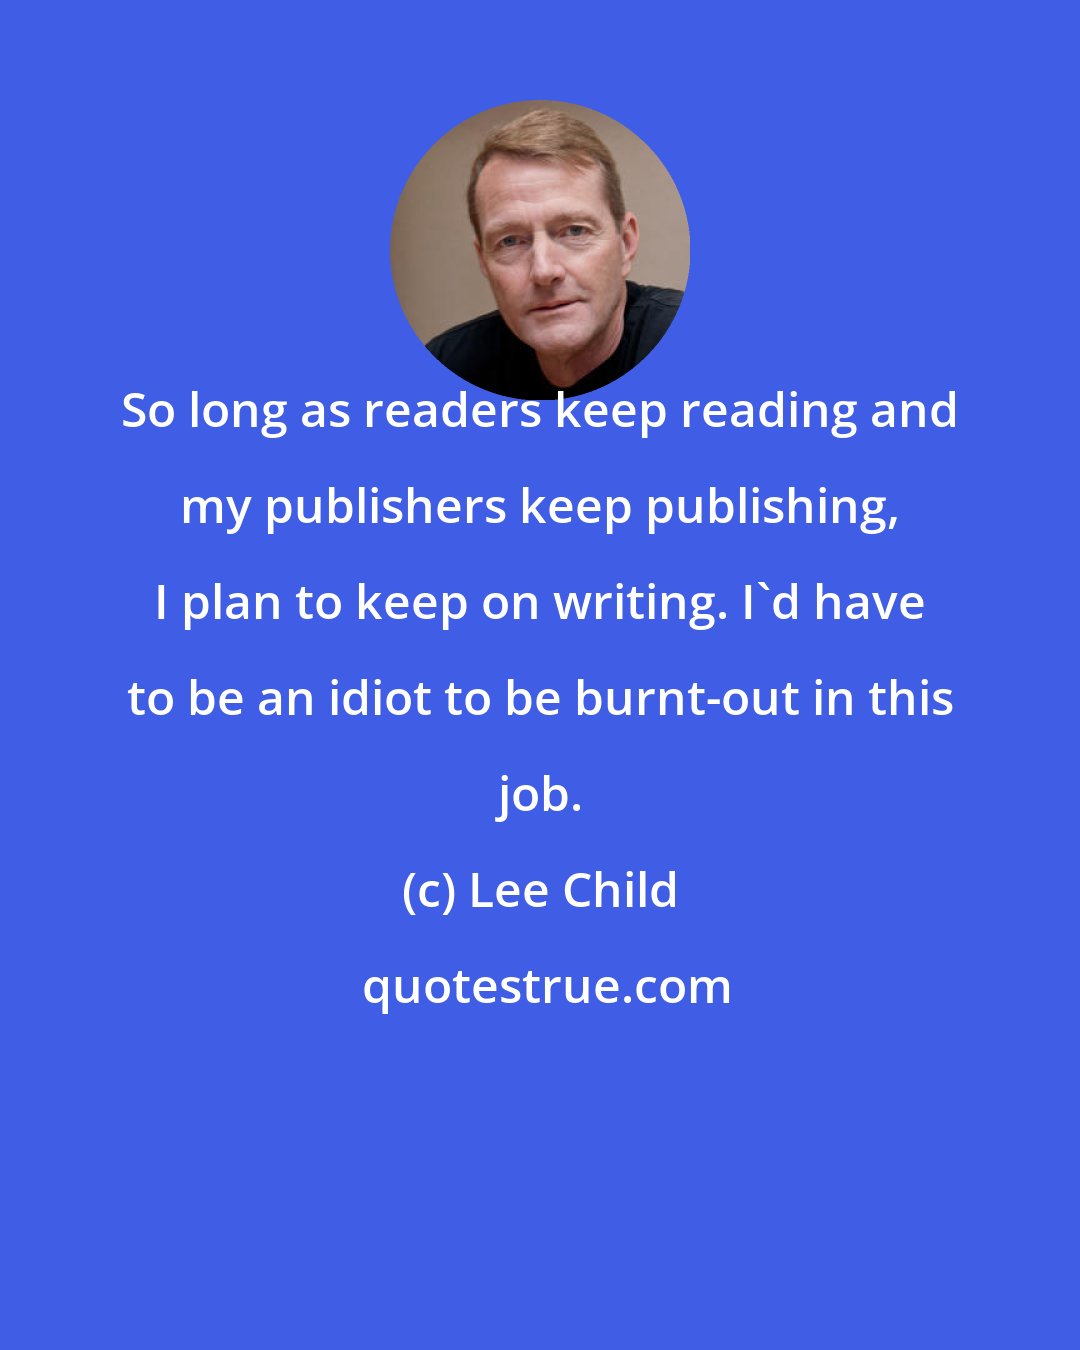 Lee Child: So long as readers keep reading and my publishers keep publishing, I plan to keep on writing. I'd have to be an idiot to be burnt-out in this job.